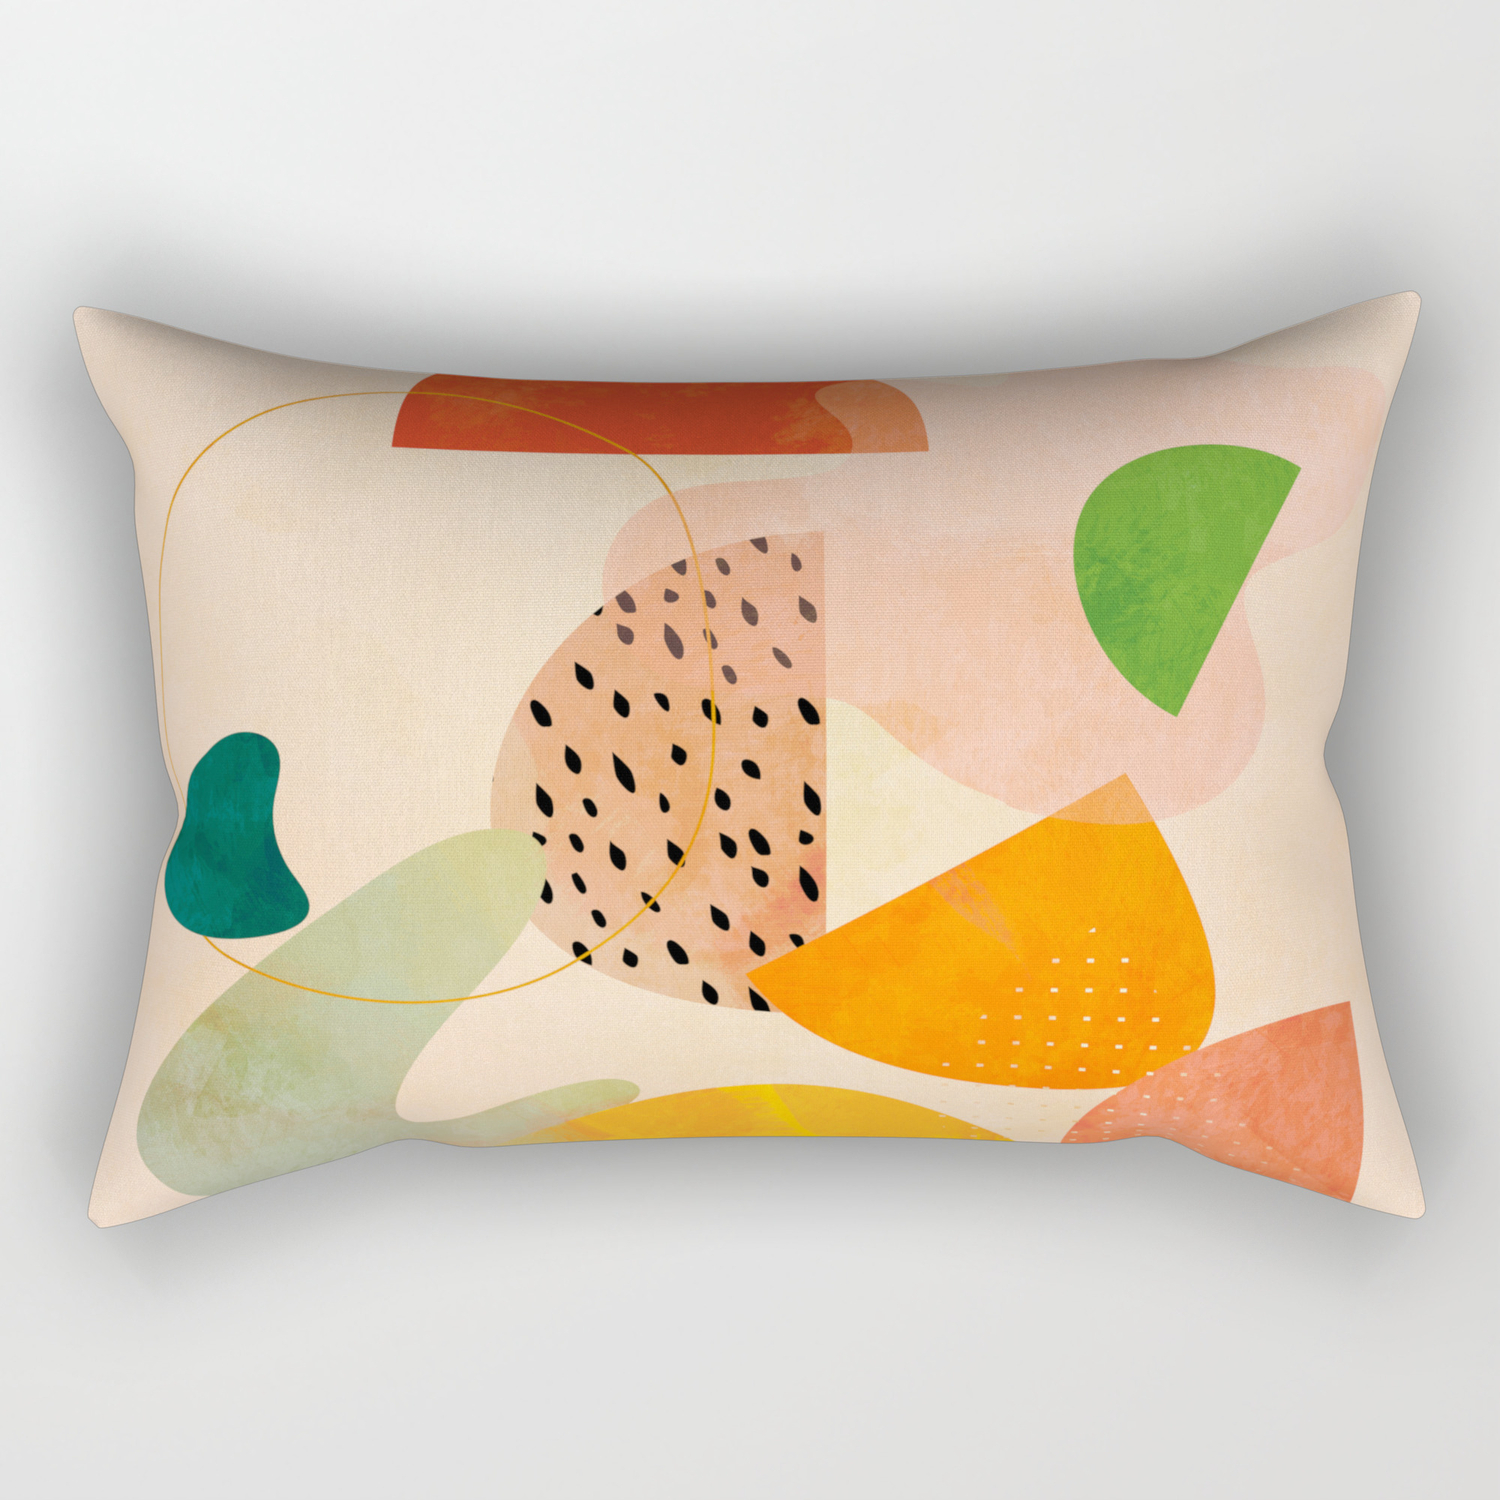 Society6 Mid Century Shapes Geometric Abstract Color 2 by Ana Rut BRE Fine Art on Rectangular Pillow 